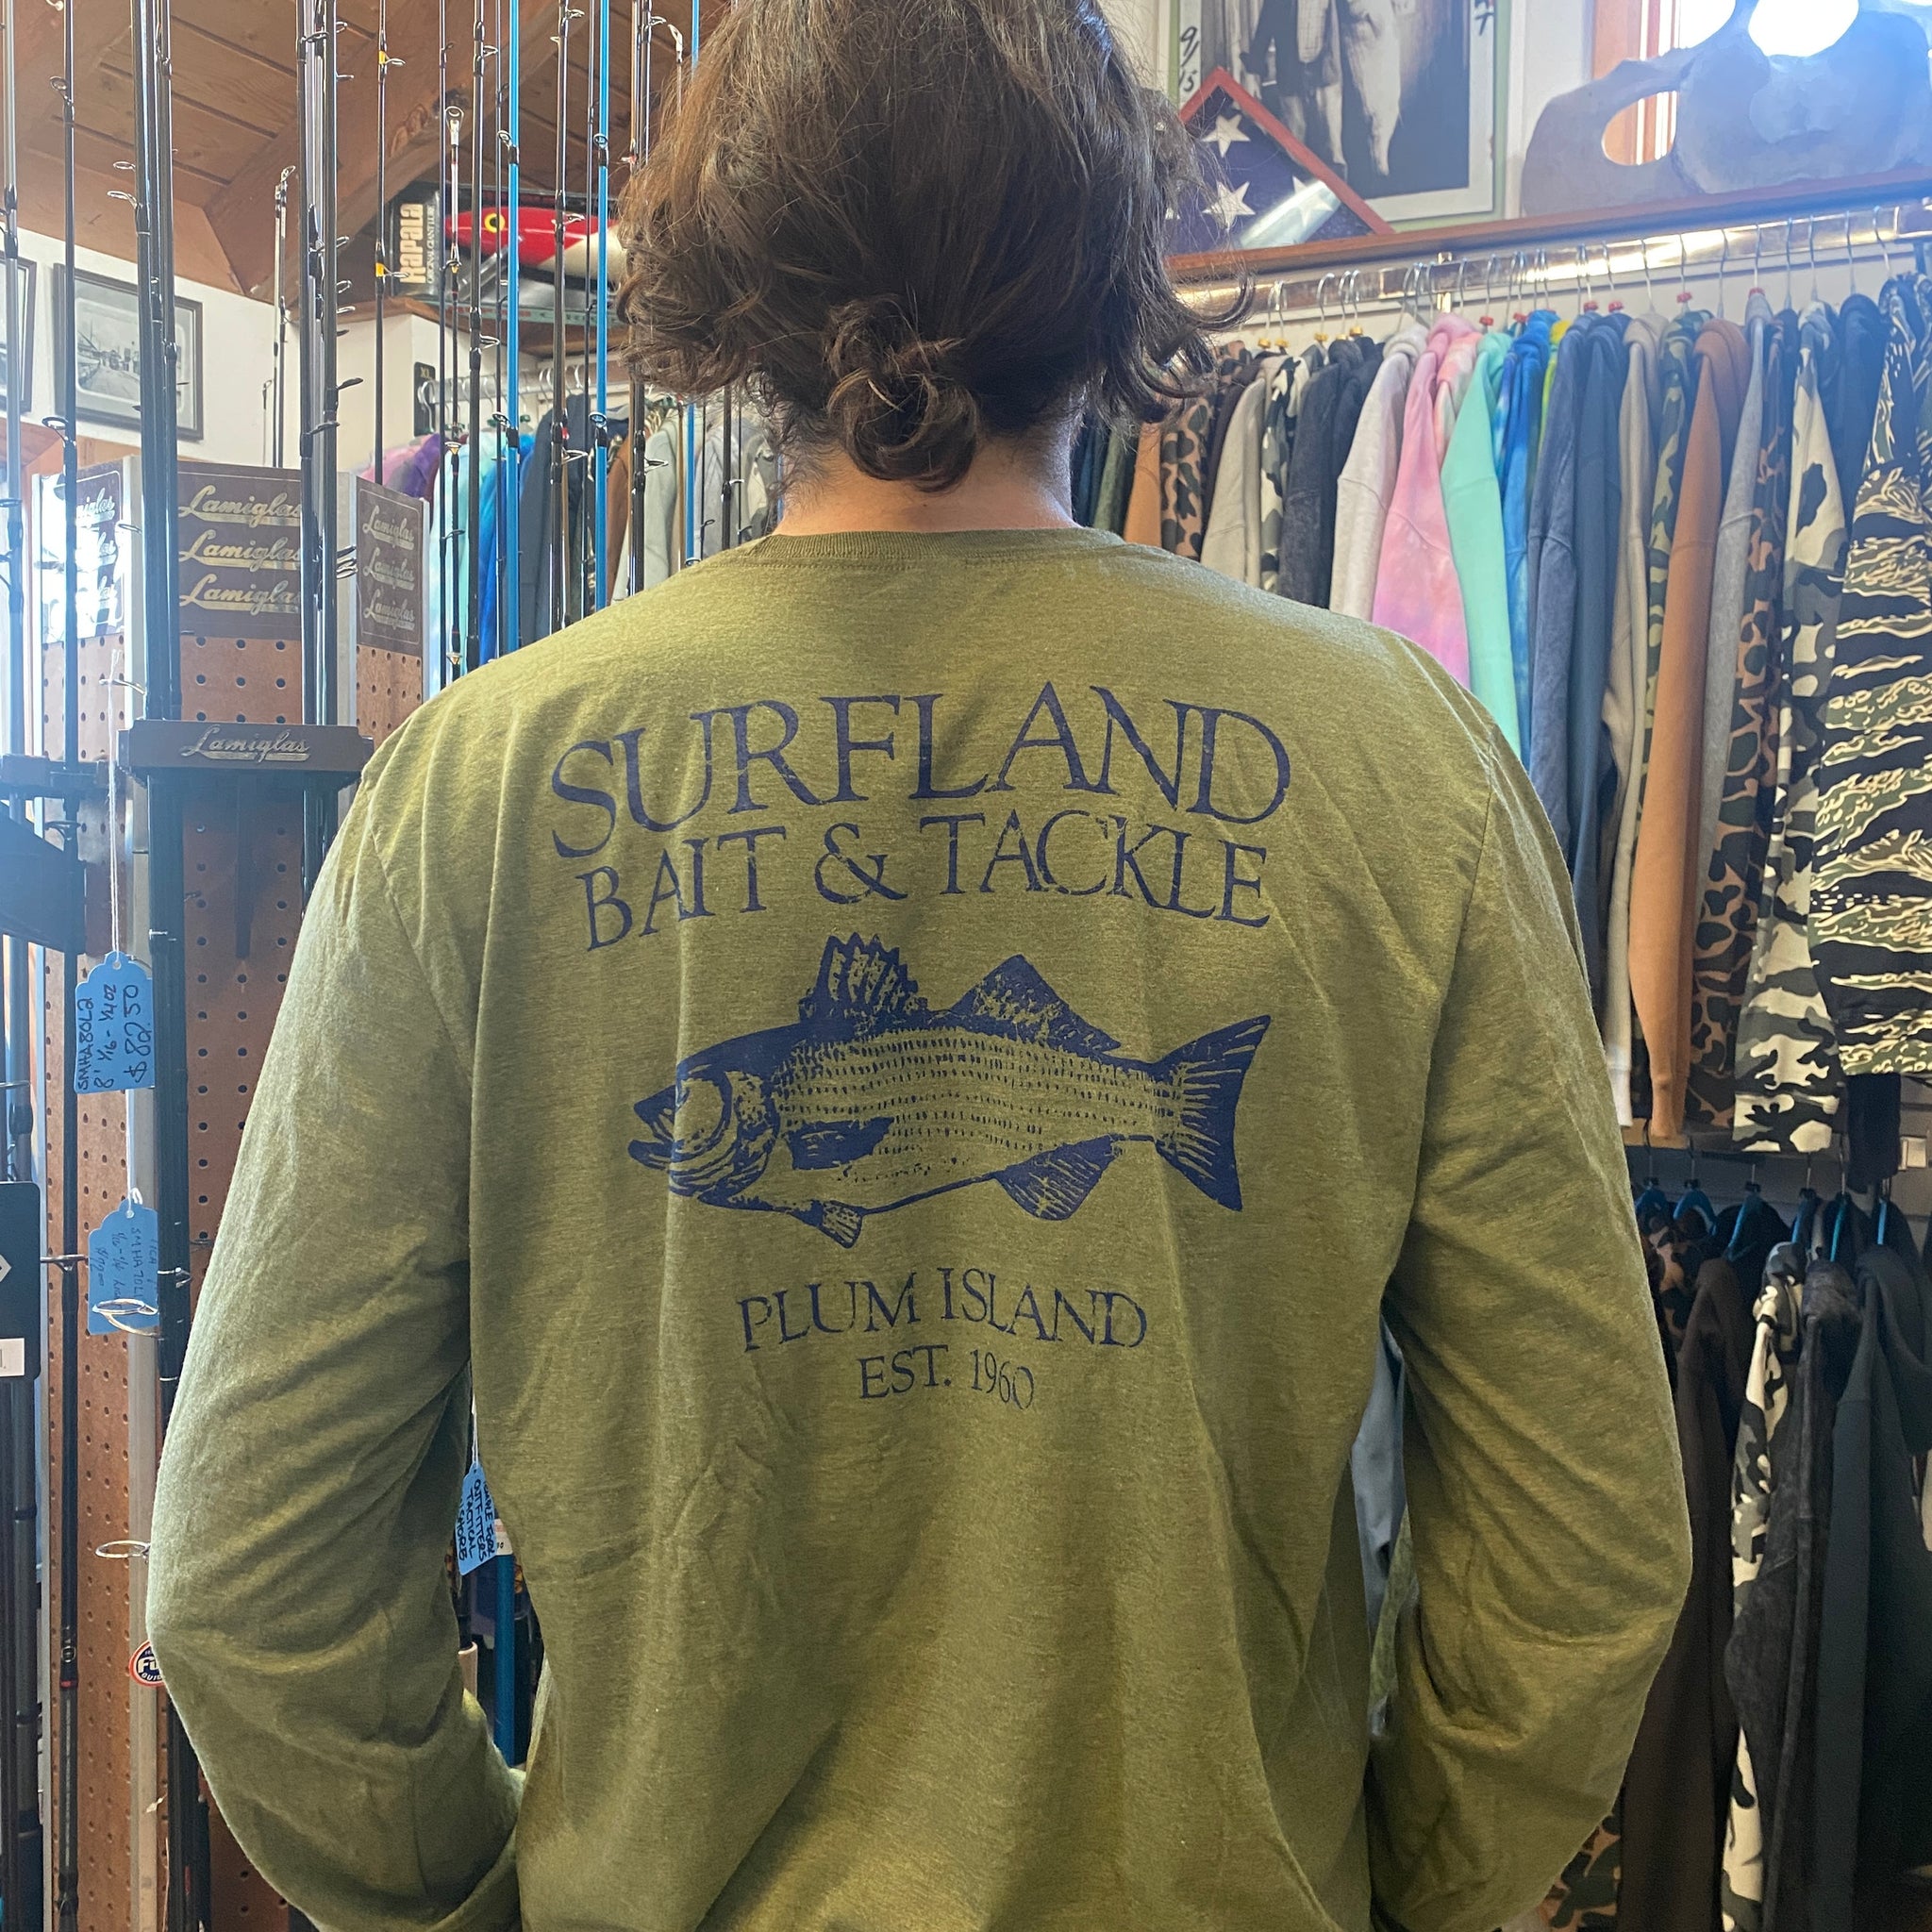 All Surfland Gear – Tagged T-shirt – Surfland Bait and Tackle